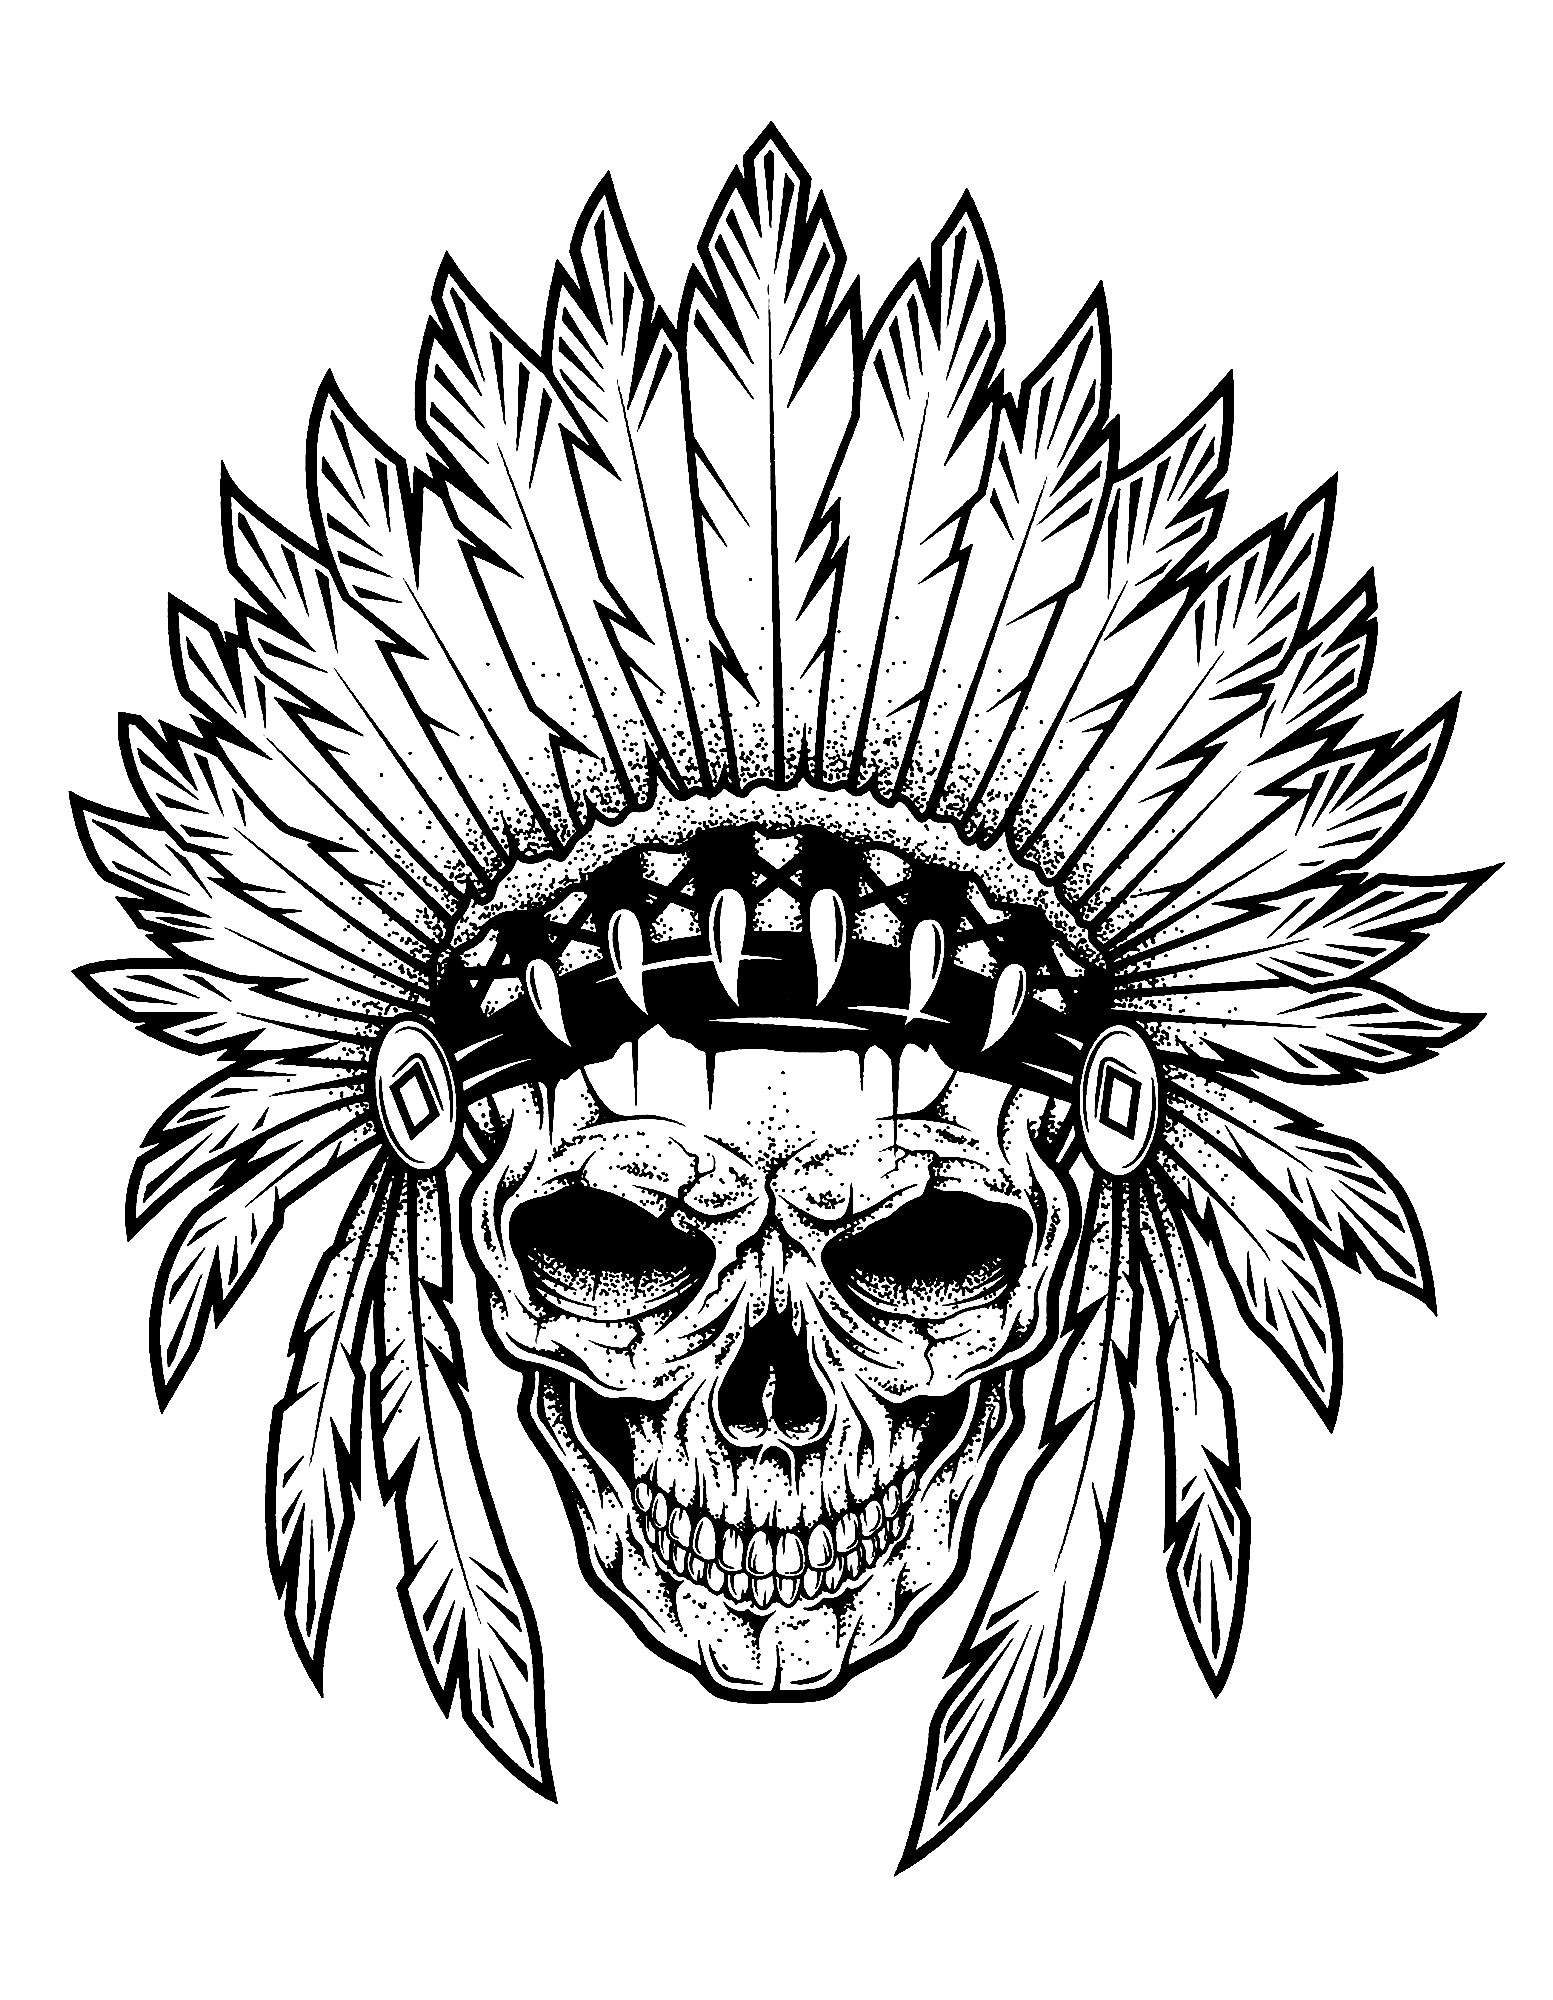 Native American Coloring Pages For Adults
 Indian chief skull Native American Adult Coloring Pages